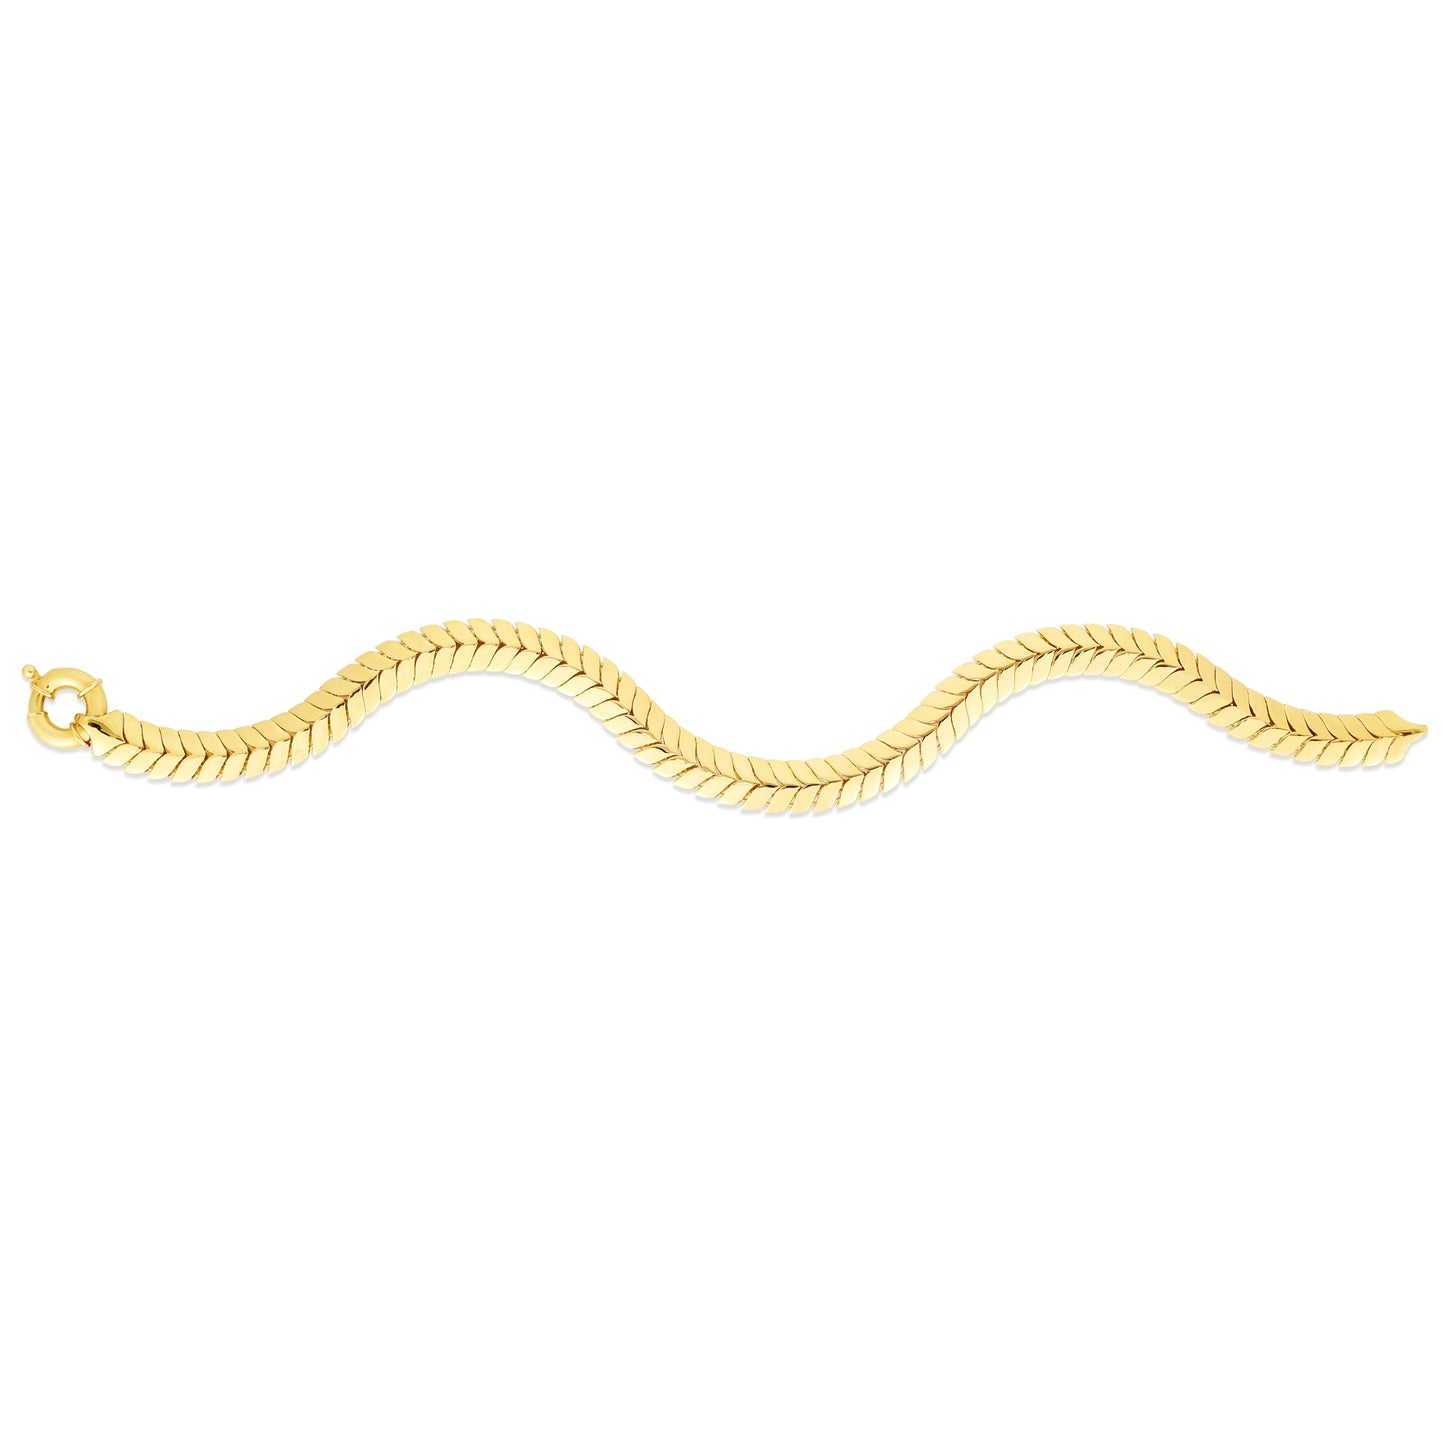 14K Gold Polished Chevron Link Chain Bracelet with Spring Clasp